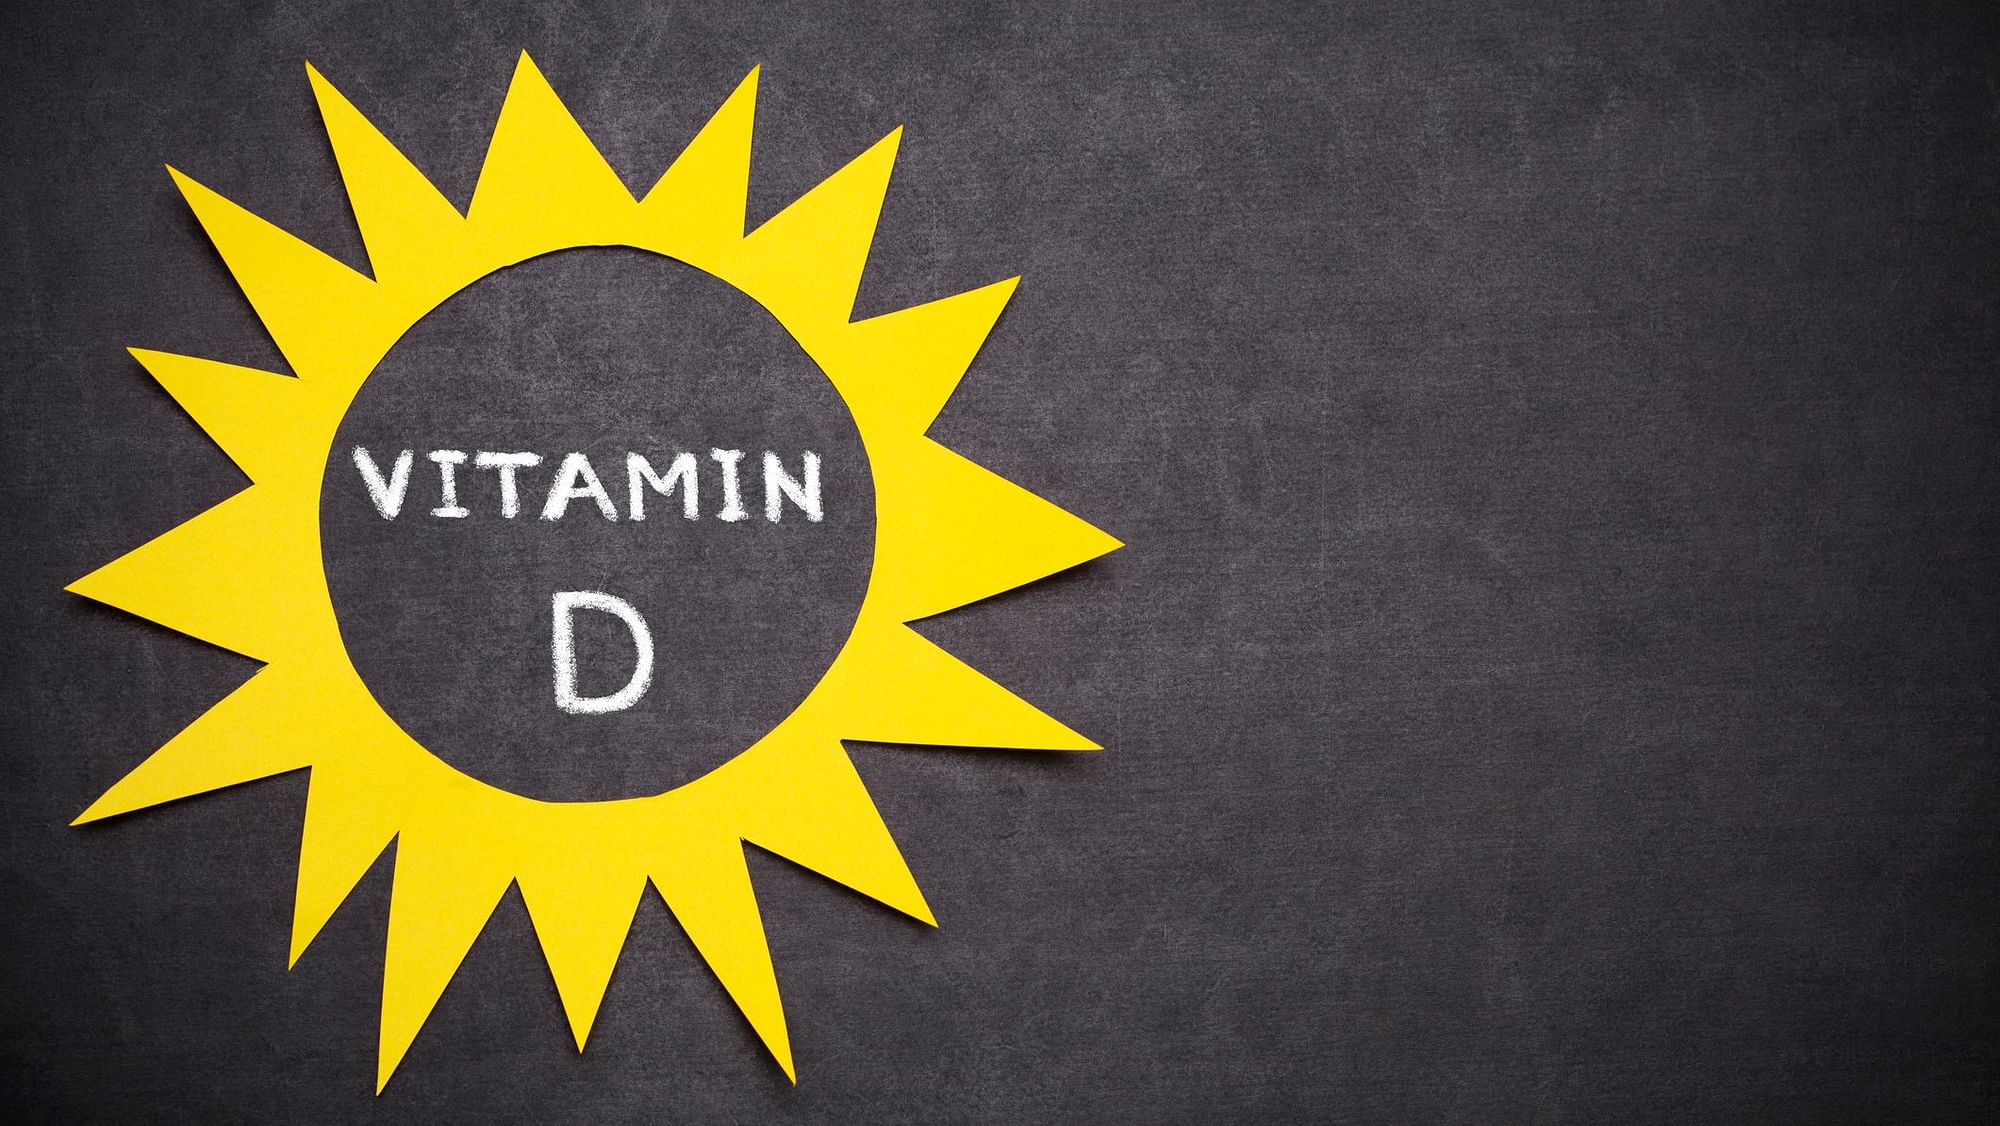 Vitamin D deficiency may be a cause of muscle weakness in old age, says study.